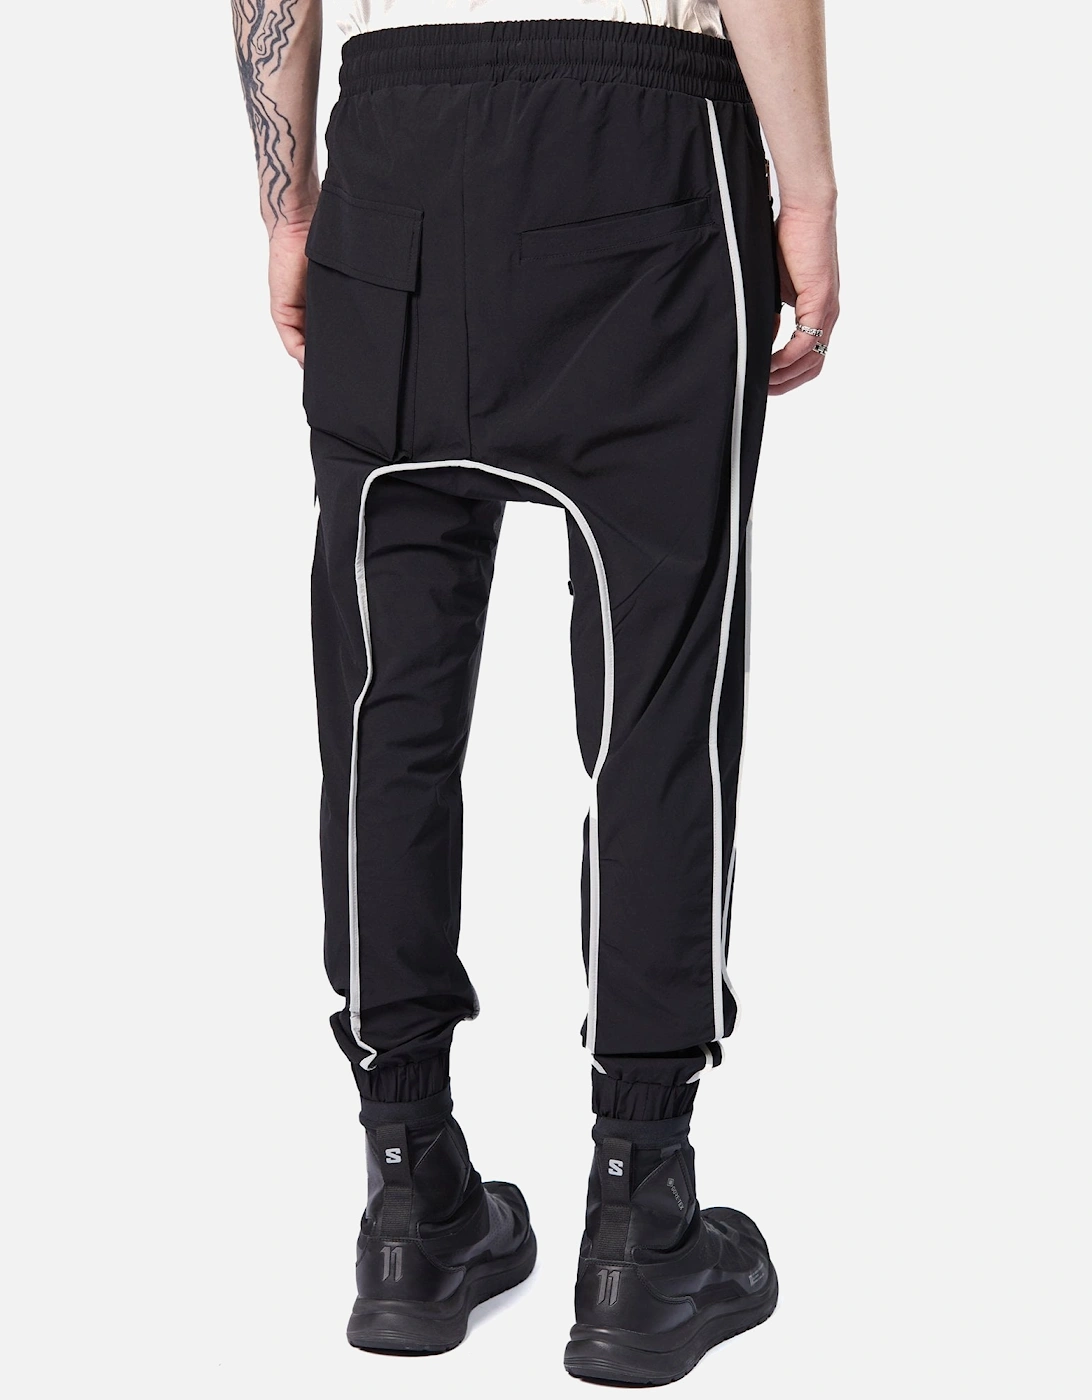 Contrast Pipping Black Cuffed Trouser